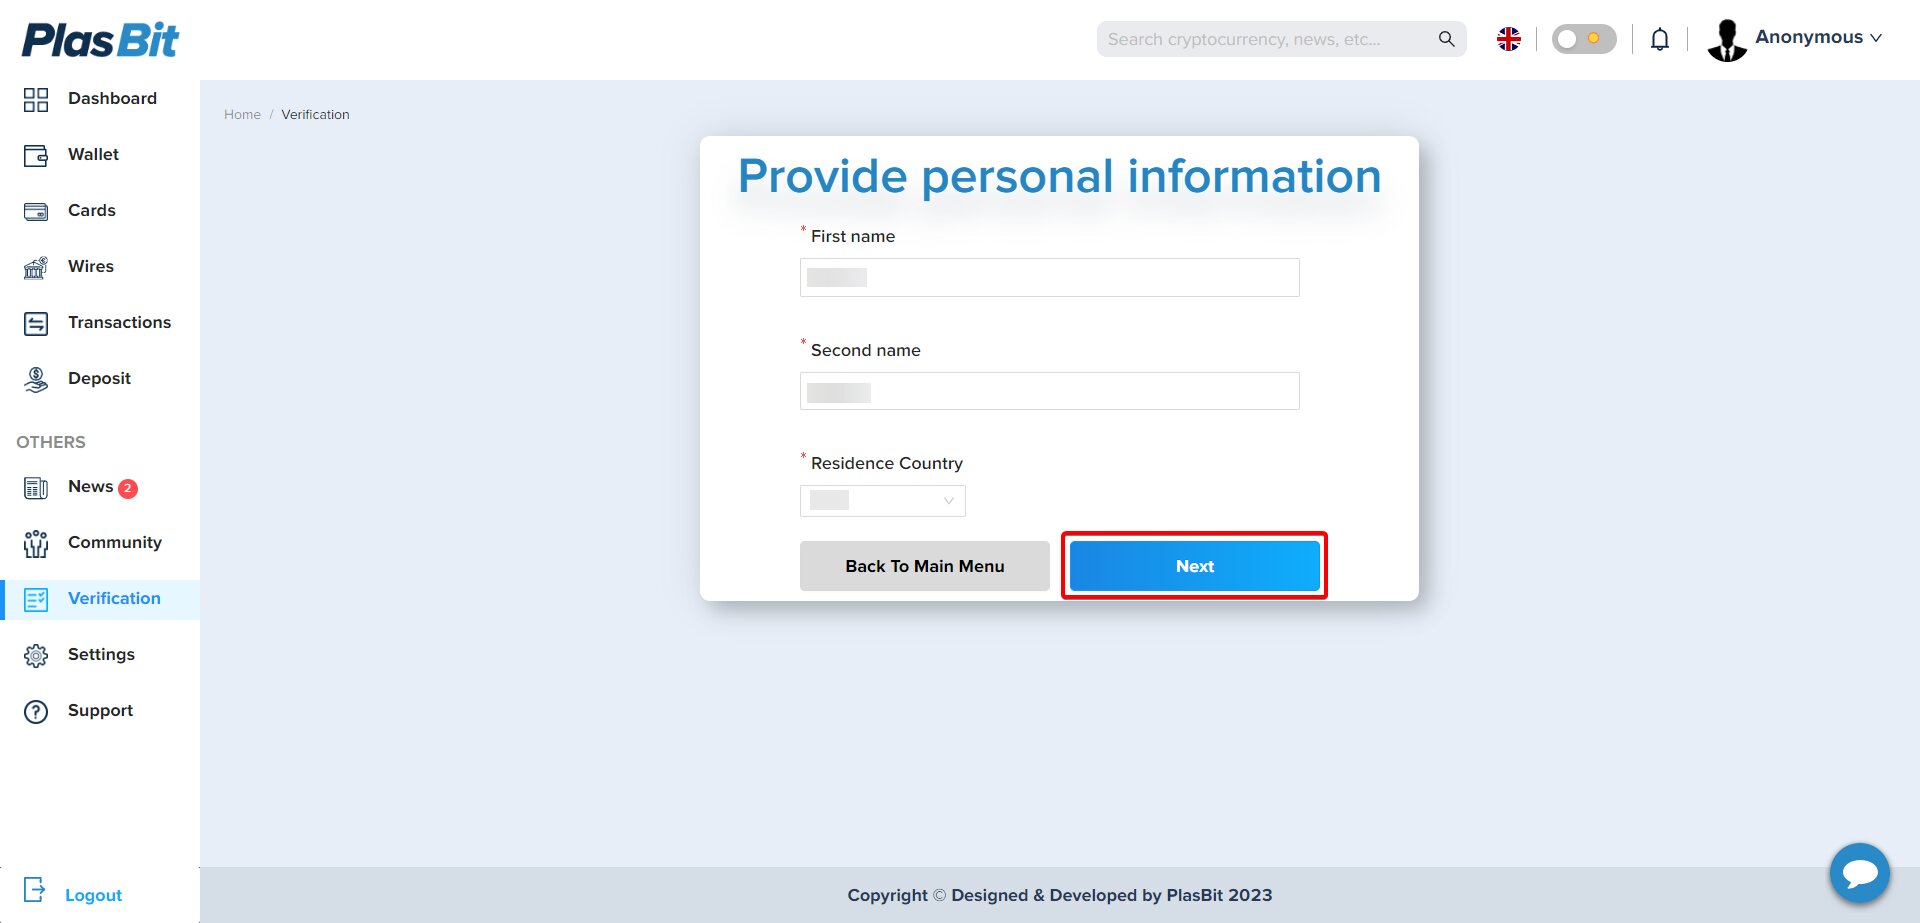 Provide personal information